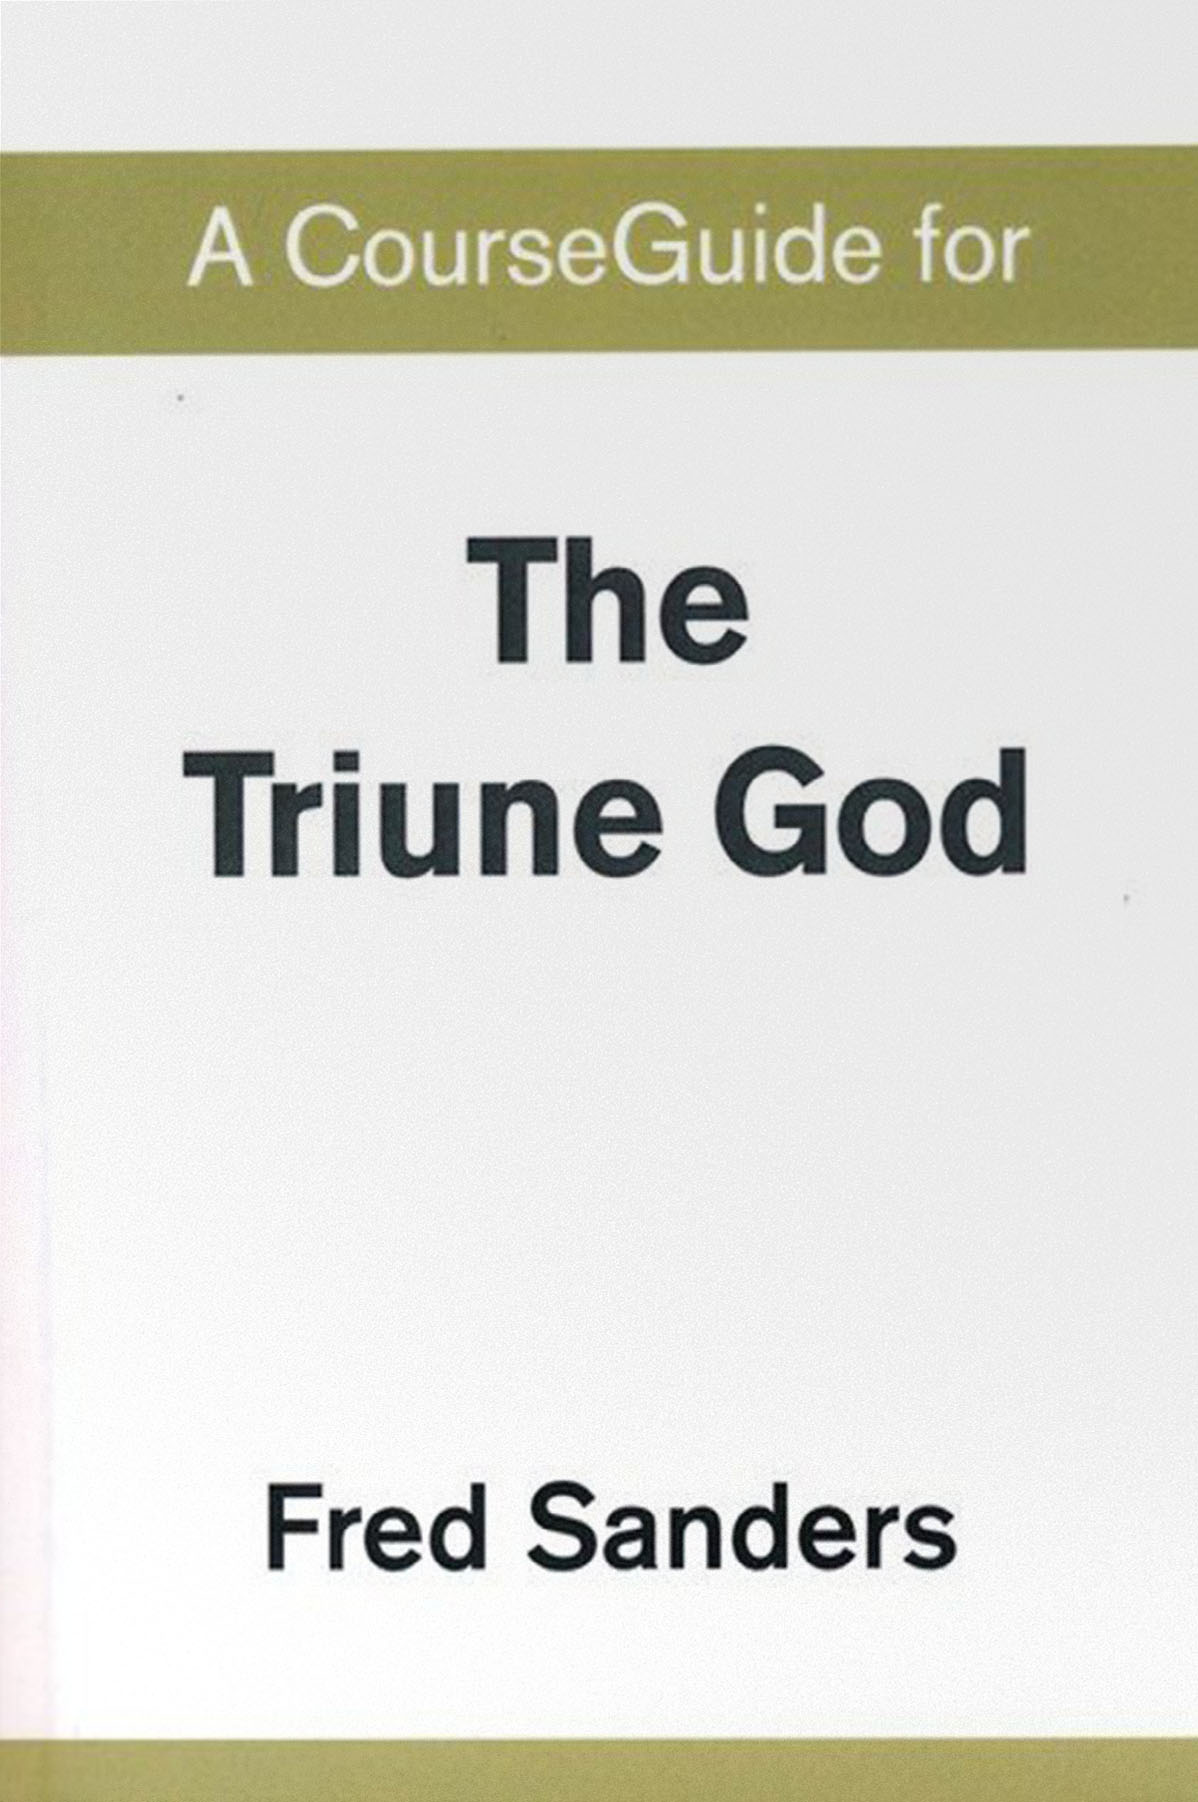 the-triune-god-guide2